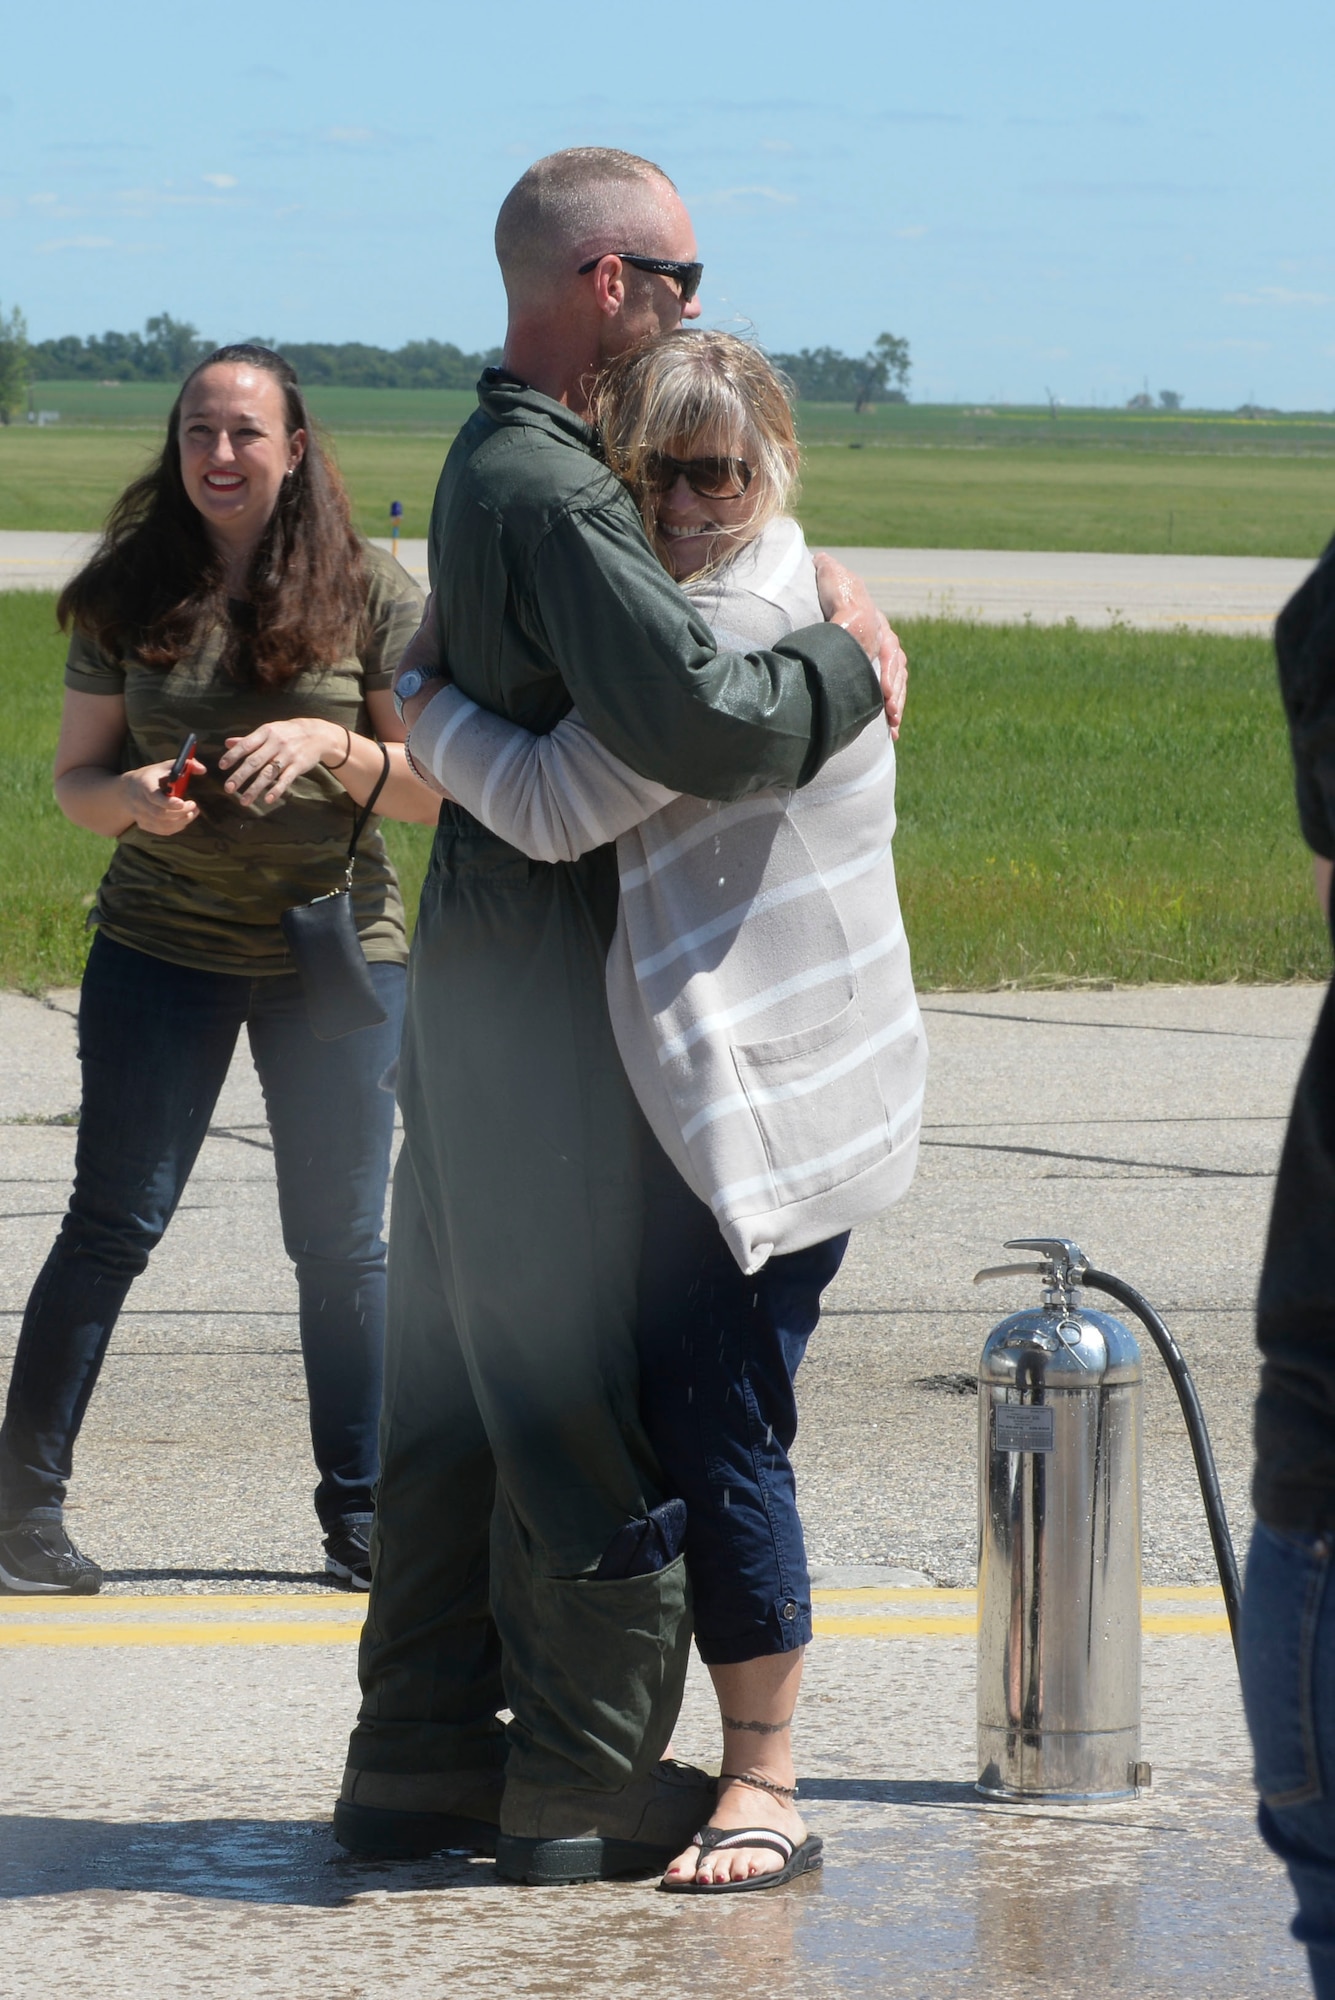 Chief Master Sgt. Geoff Weimer hugs his wife LeAnne after celebration of his “fini-flight” at Minot Air Force Base, N.D., June 23, 2016. The “fini-flight” is the final flight taken by an aircrew member at his current assignment. (U.S. Air Force photo/Airman 1st Class Jessica Weissman)